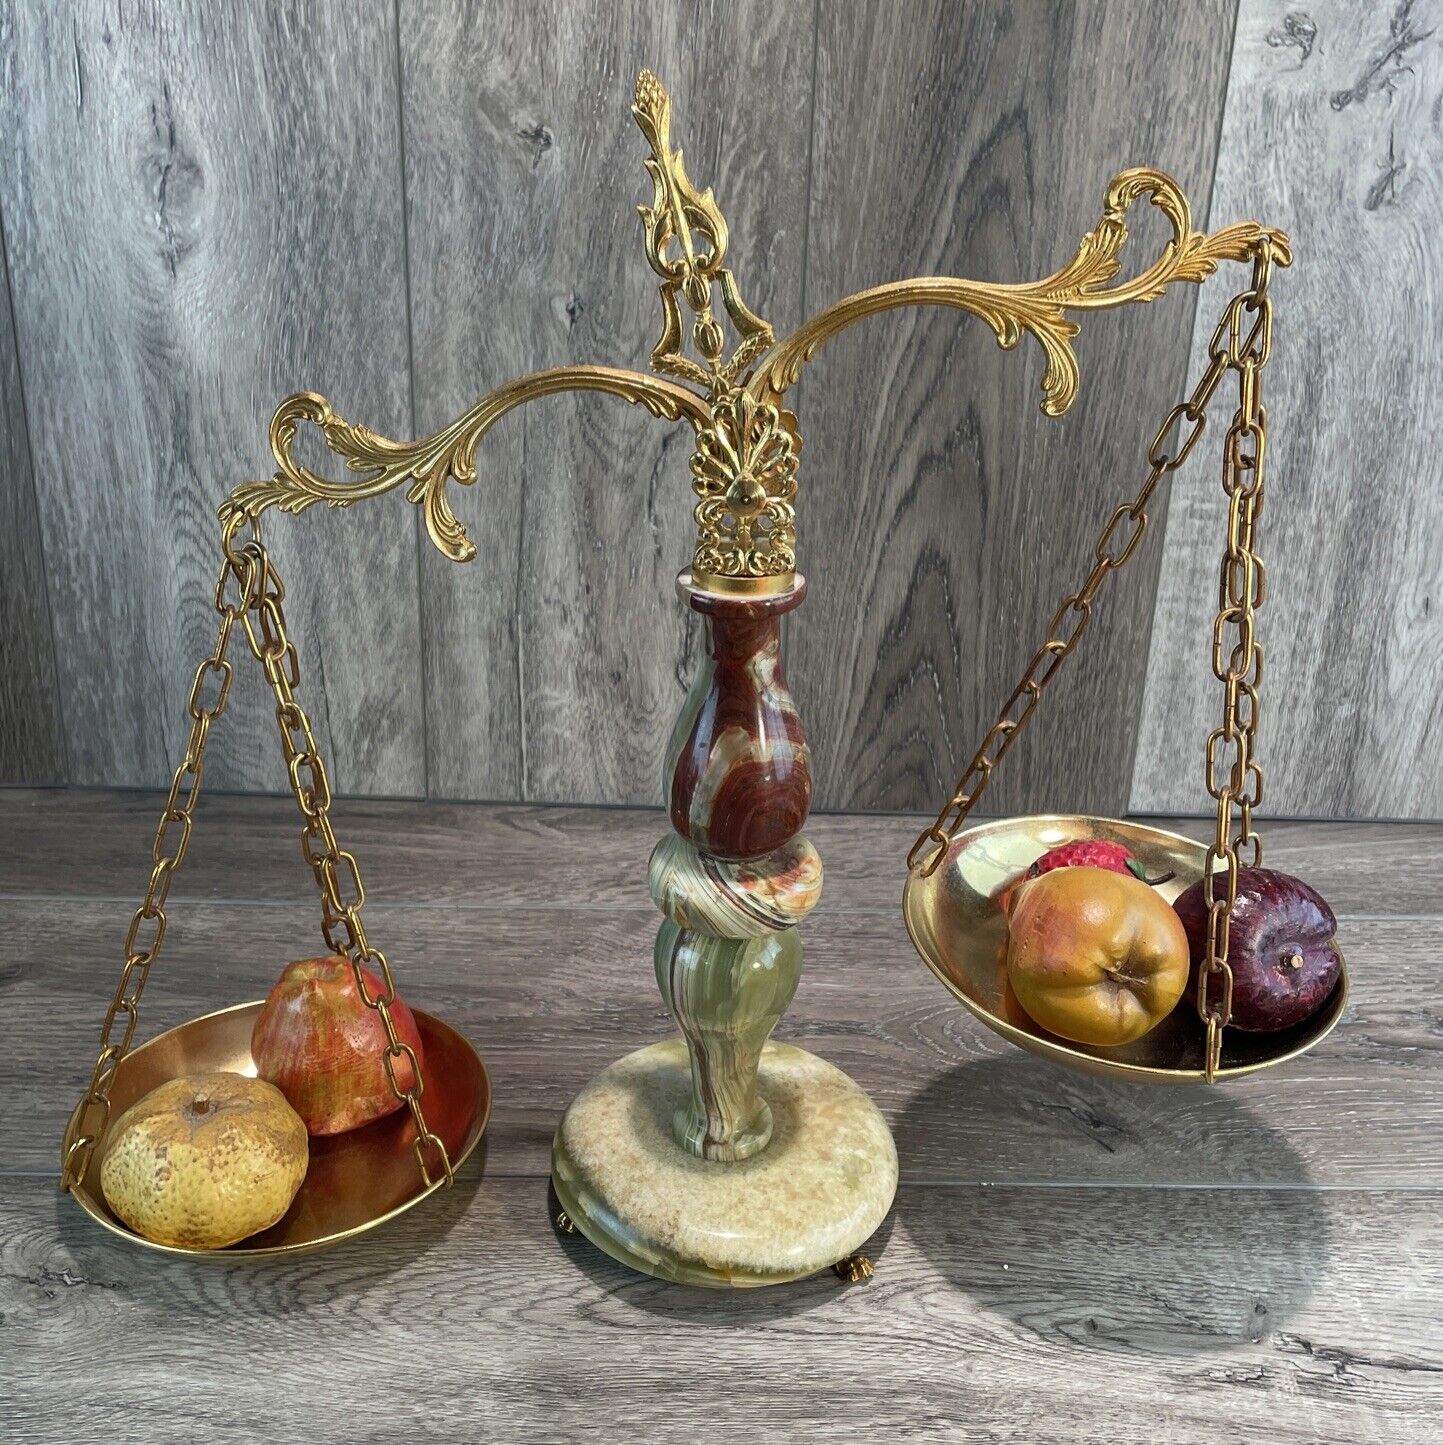 Rare Ornate Vintage Marble Porcelain Fruit Scale For Kitchen And Hole Decor